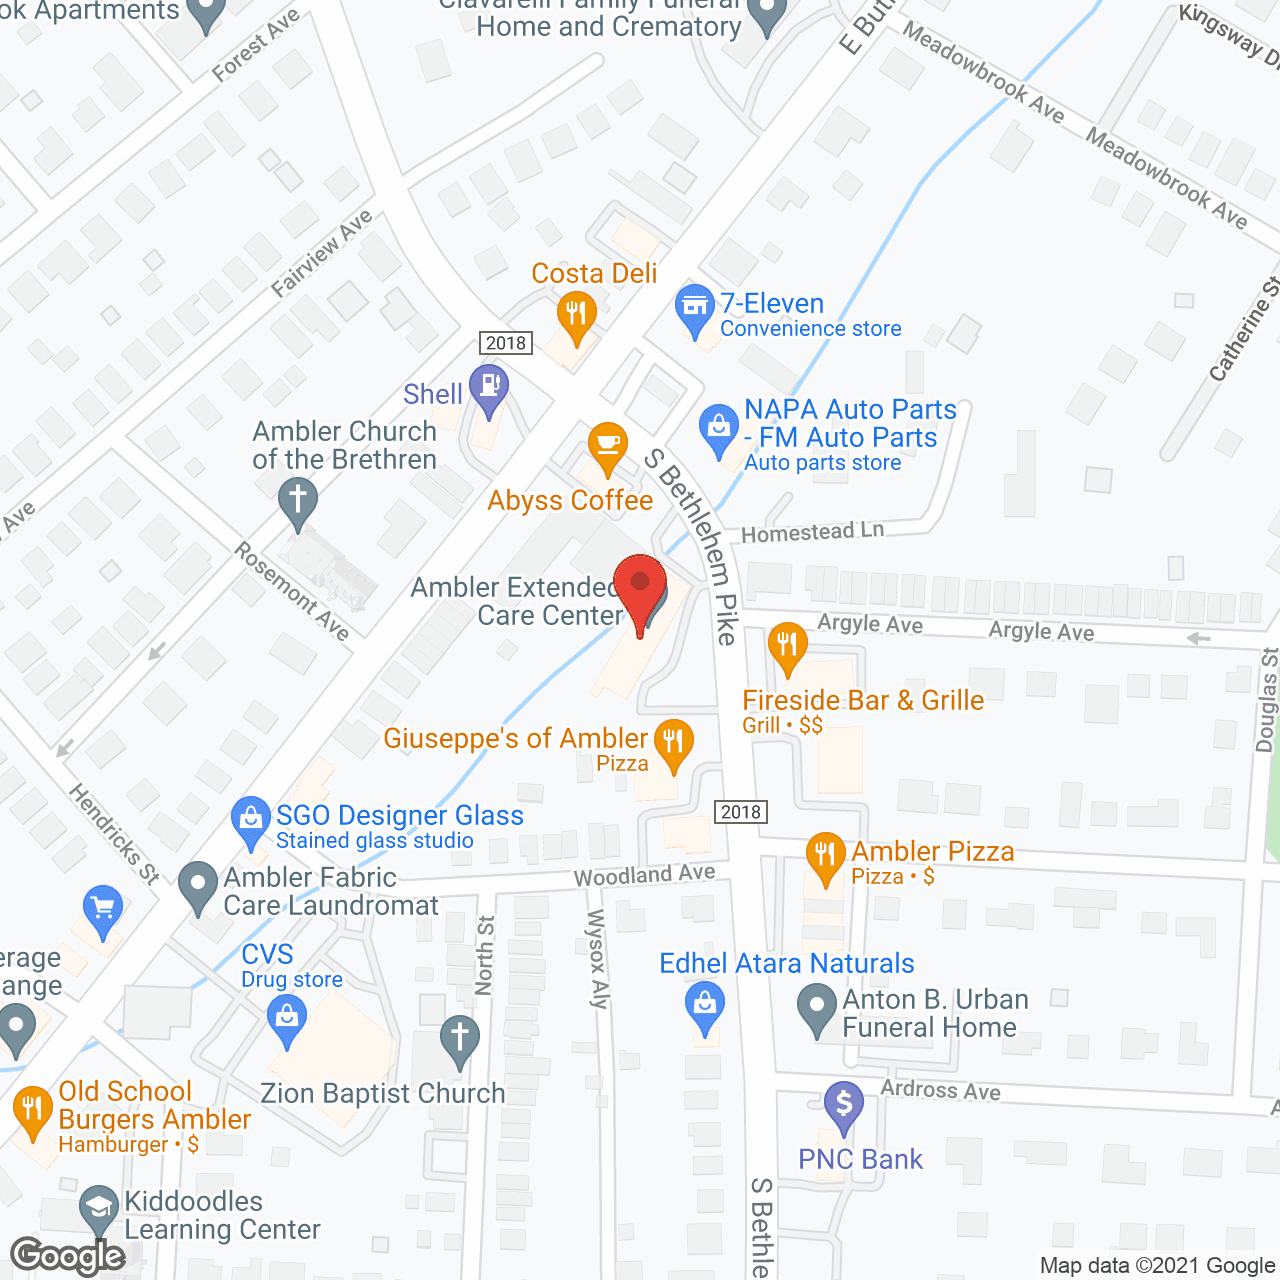 Ambler Extended Care Center in google map